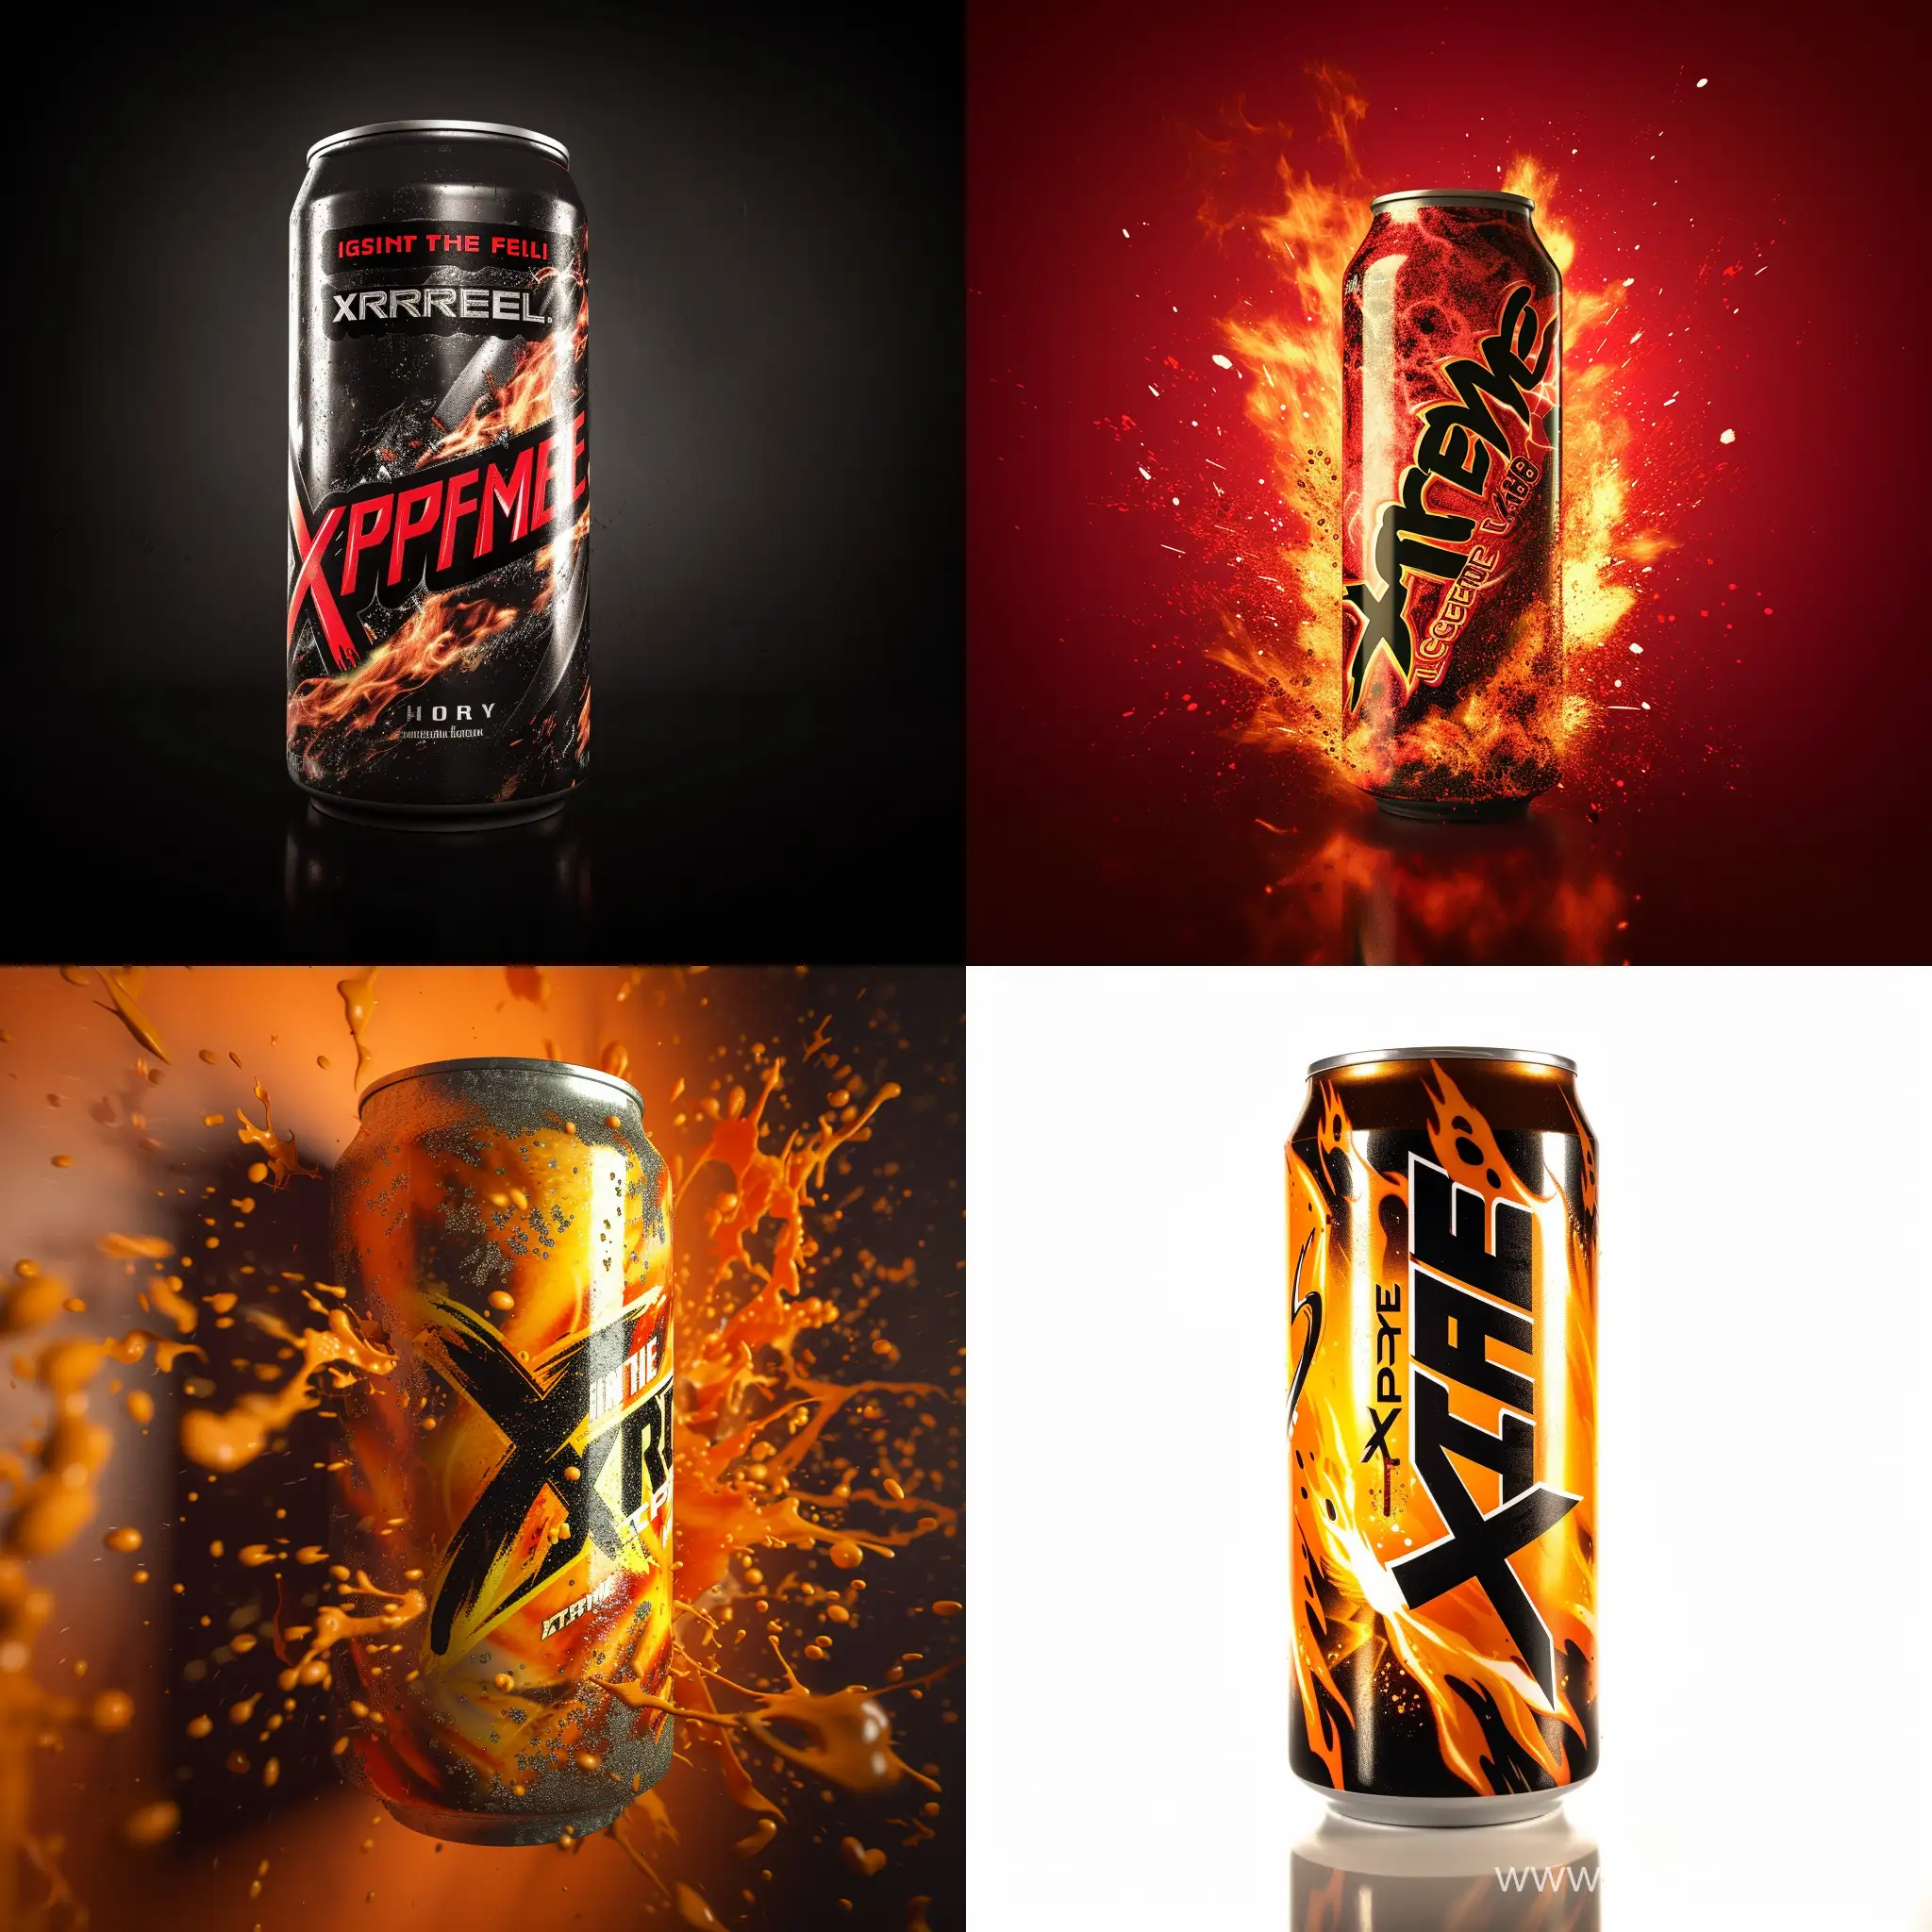 A energydrink whit the name XtremeFuel with a slogan Ignite the Xtreme. XtremeFuel is adveturos and healthy.